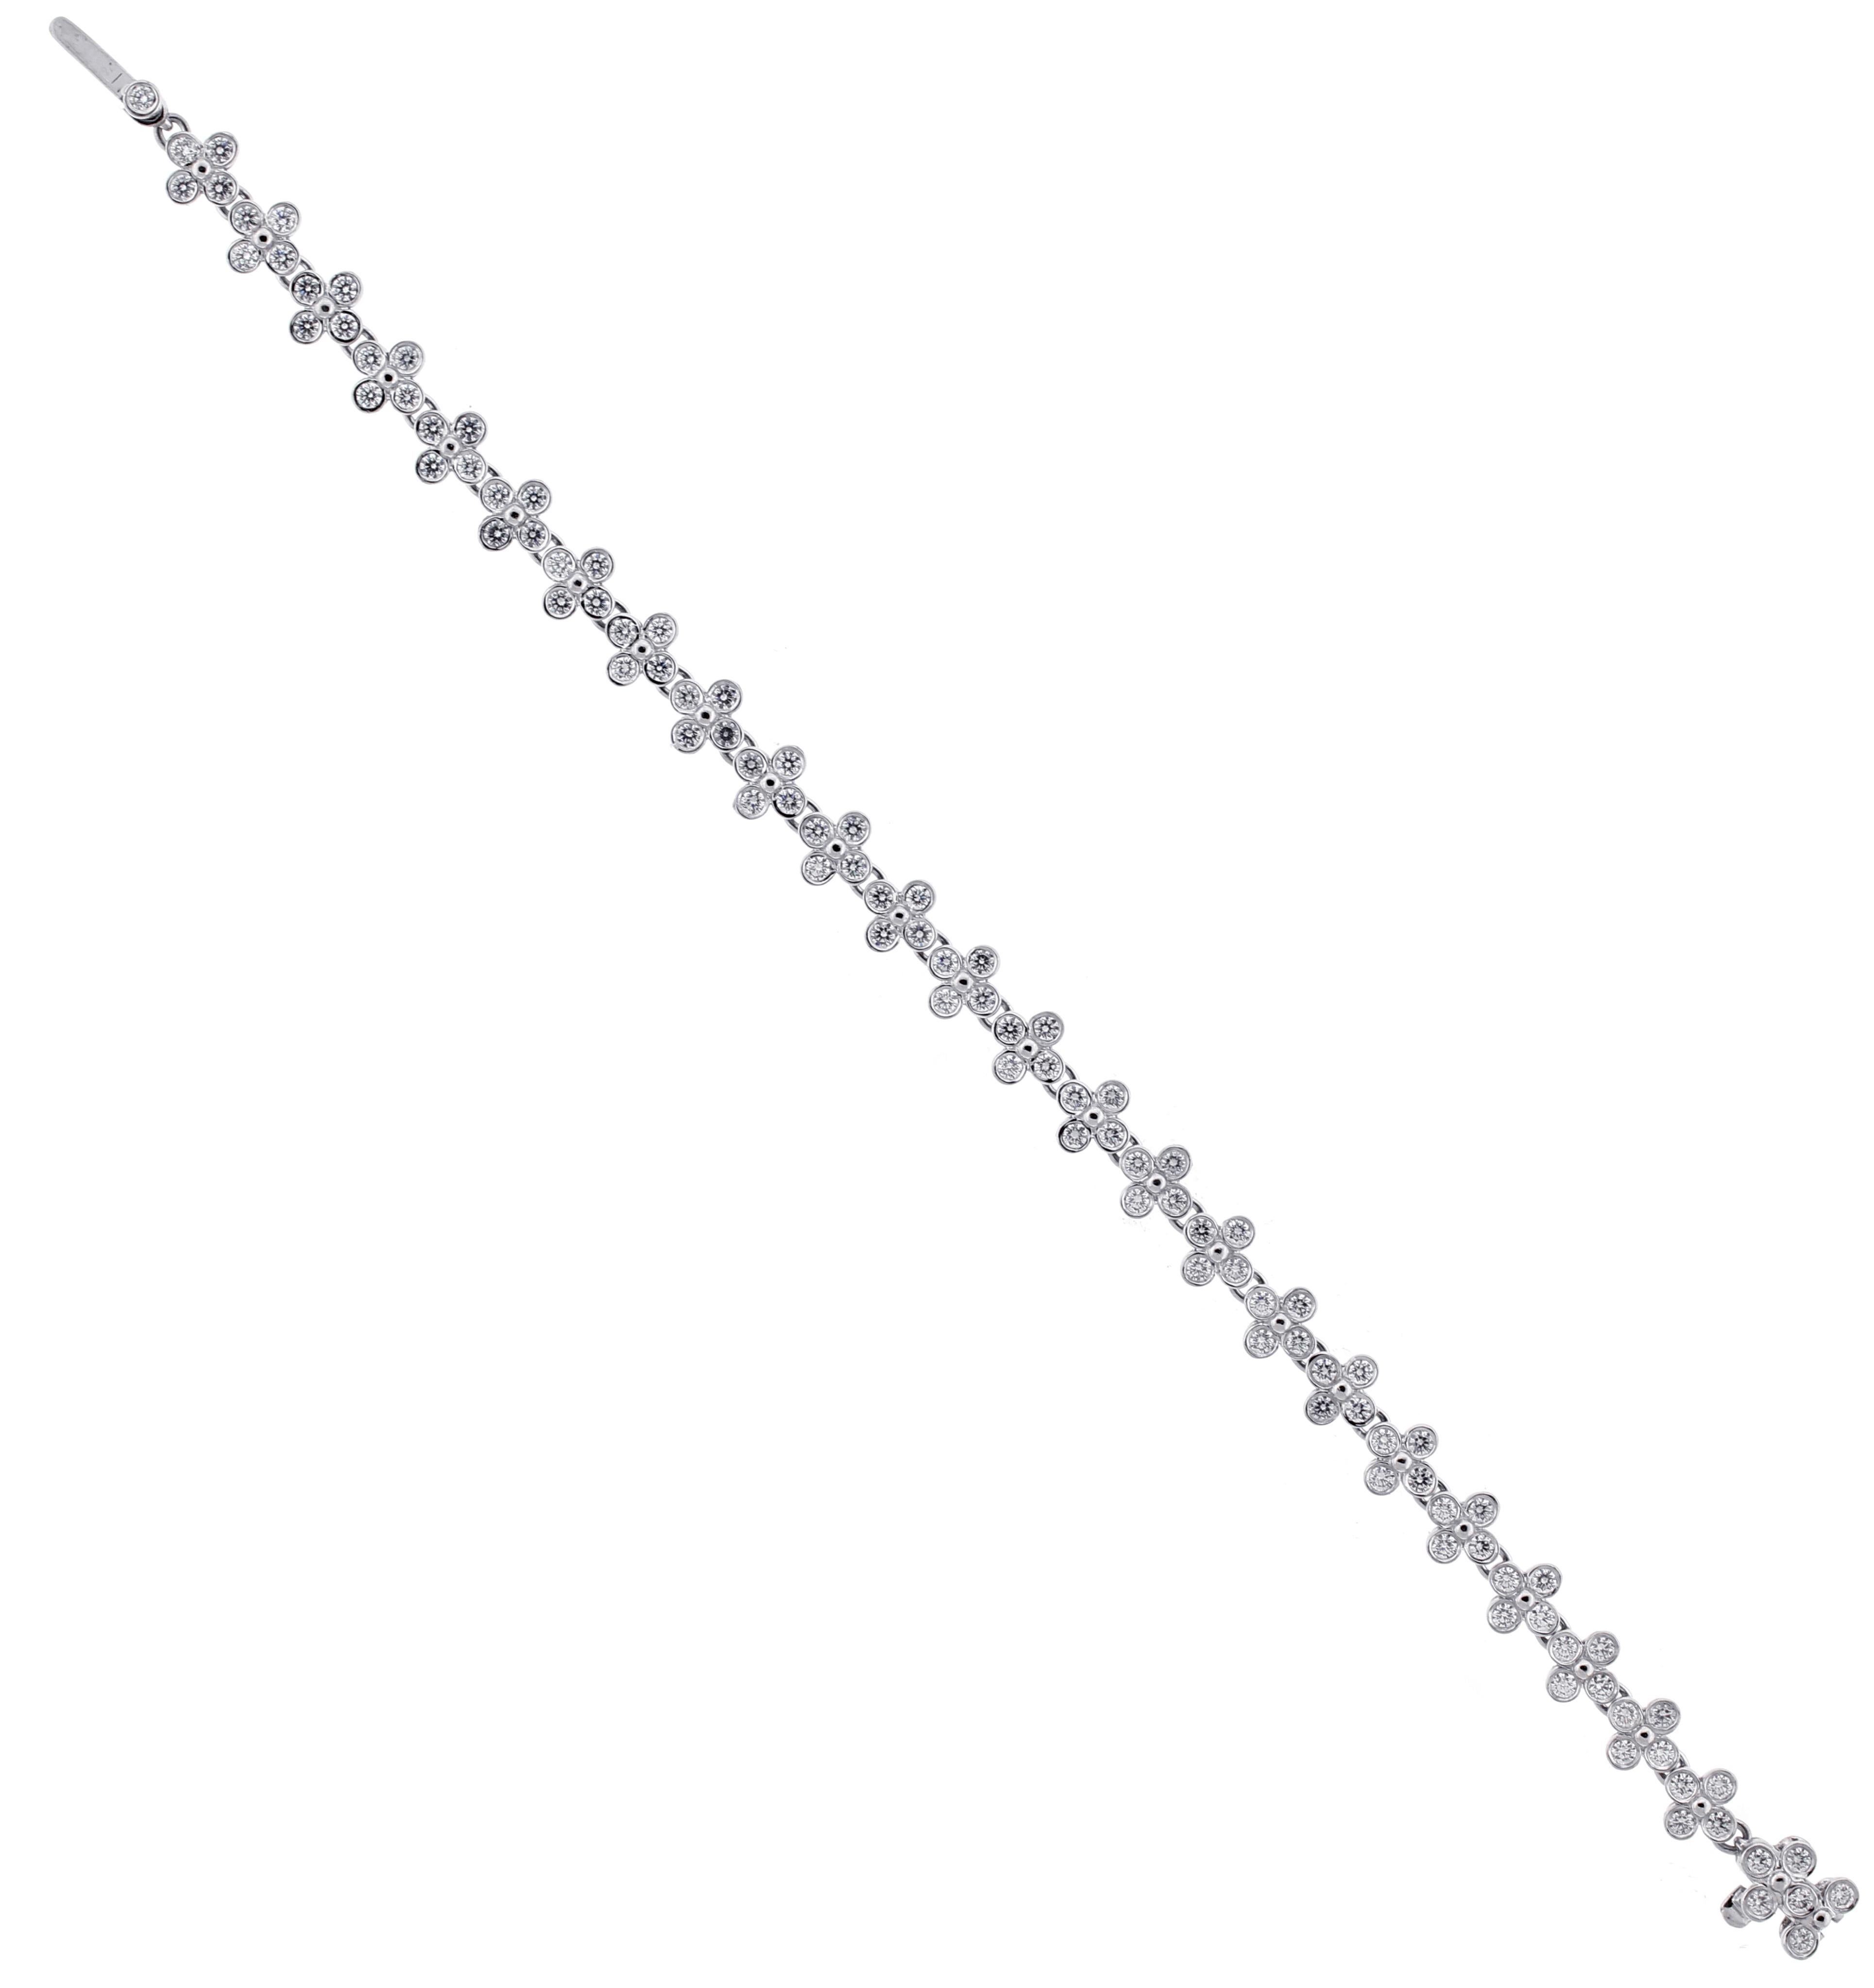 From Tiffany & Co.'s  diamond lace collection,  this wonderful platinum bracelet featuring clovers of shimmering diamonds

♦ Designer: Tiffany & Co.
♦ Metal: Platinum
♦ 21st century
♦ 6 5/8ths of and inch long 8/8ths wide
♦ 107 diamonds weigh 3.21